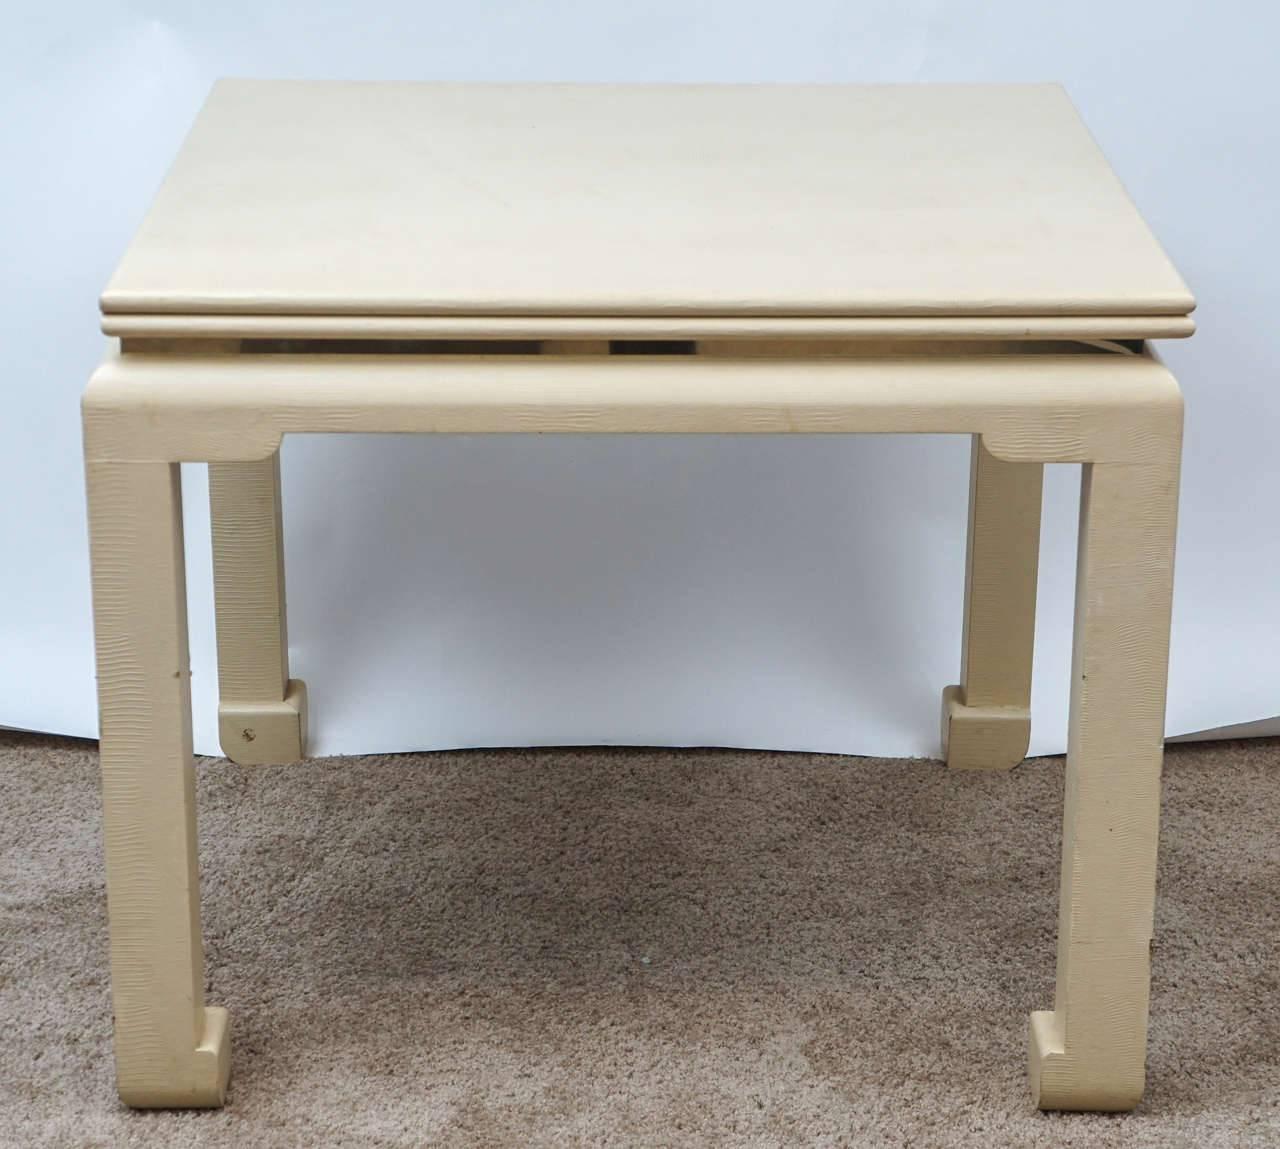 Wonderful flip-top game table expands to accommodate six-eight diners. The embossed Ivory leather is in fair condition with occasional scuffs and minor losses. Can be restored upon request. Subtle suggestion of an Asian aesthetic to the form of the